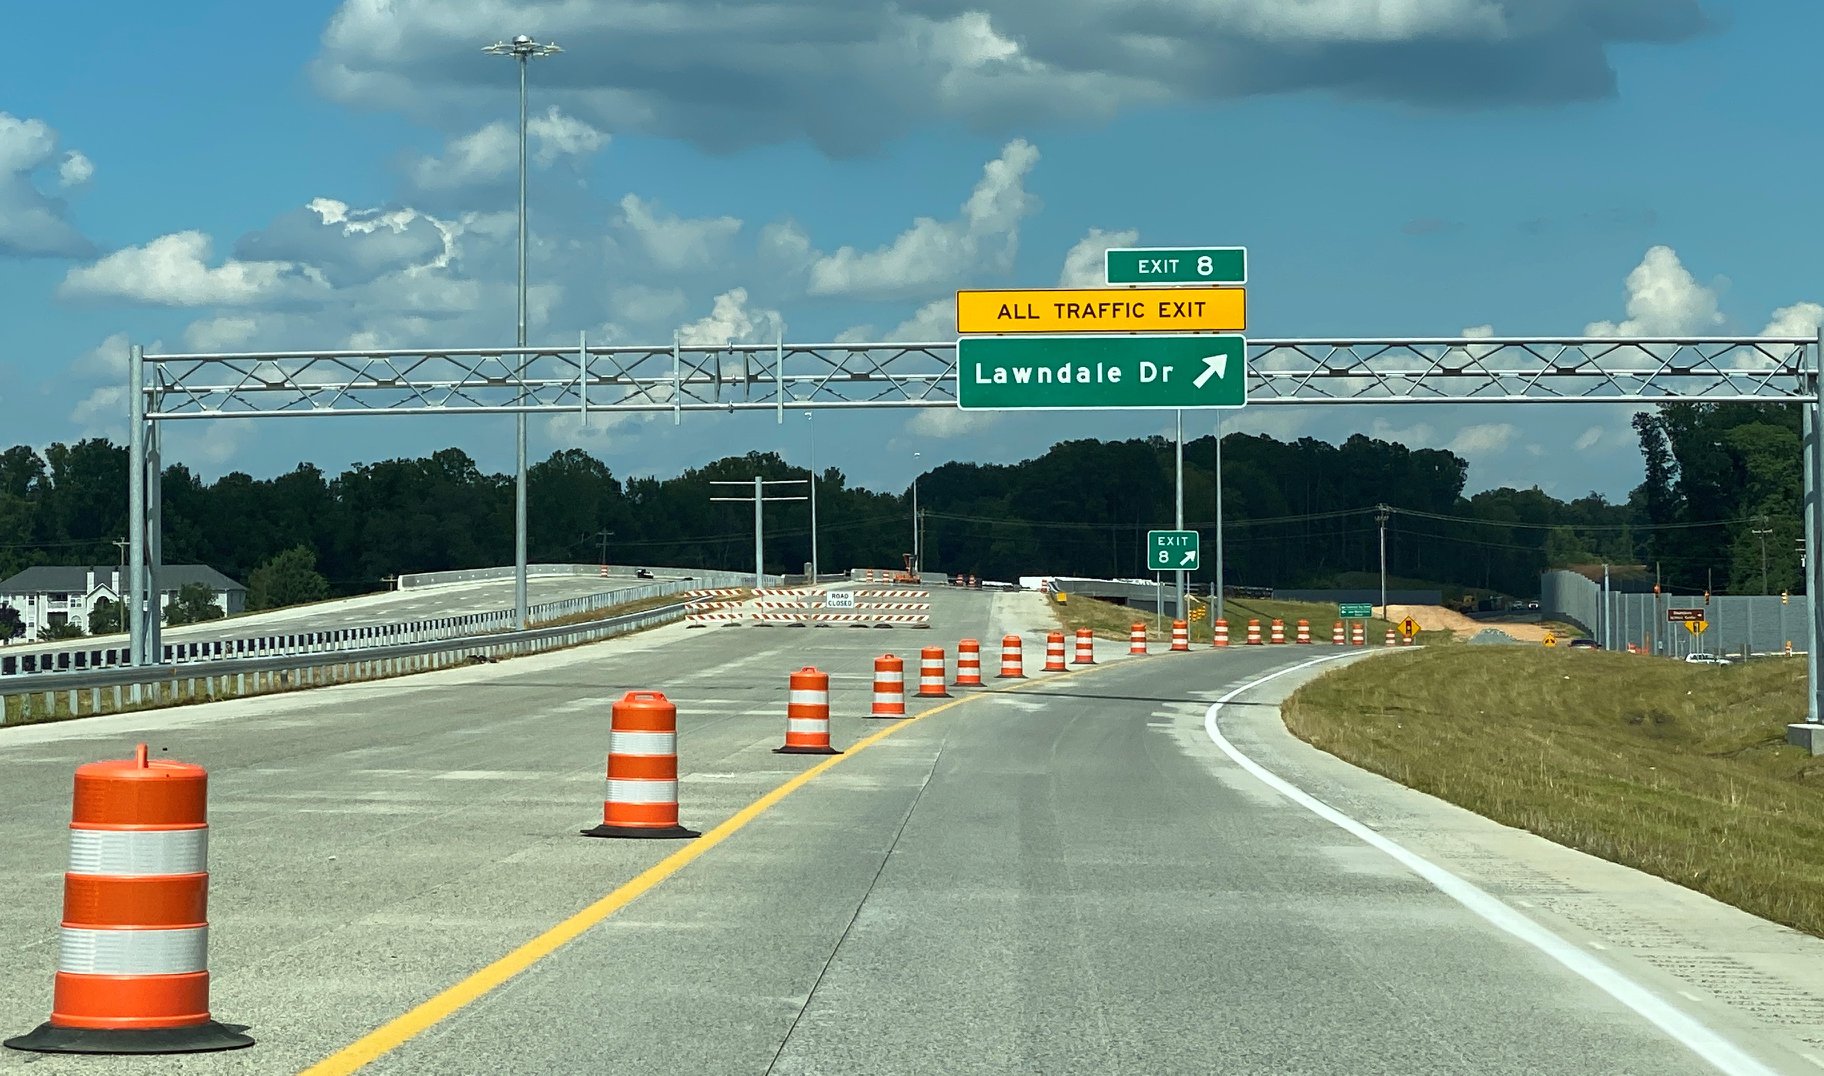 Image of overhead signage at current end of I-840 East Greensboro Urban Loop at Lawndale Drive, by David Johnson July 2020